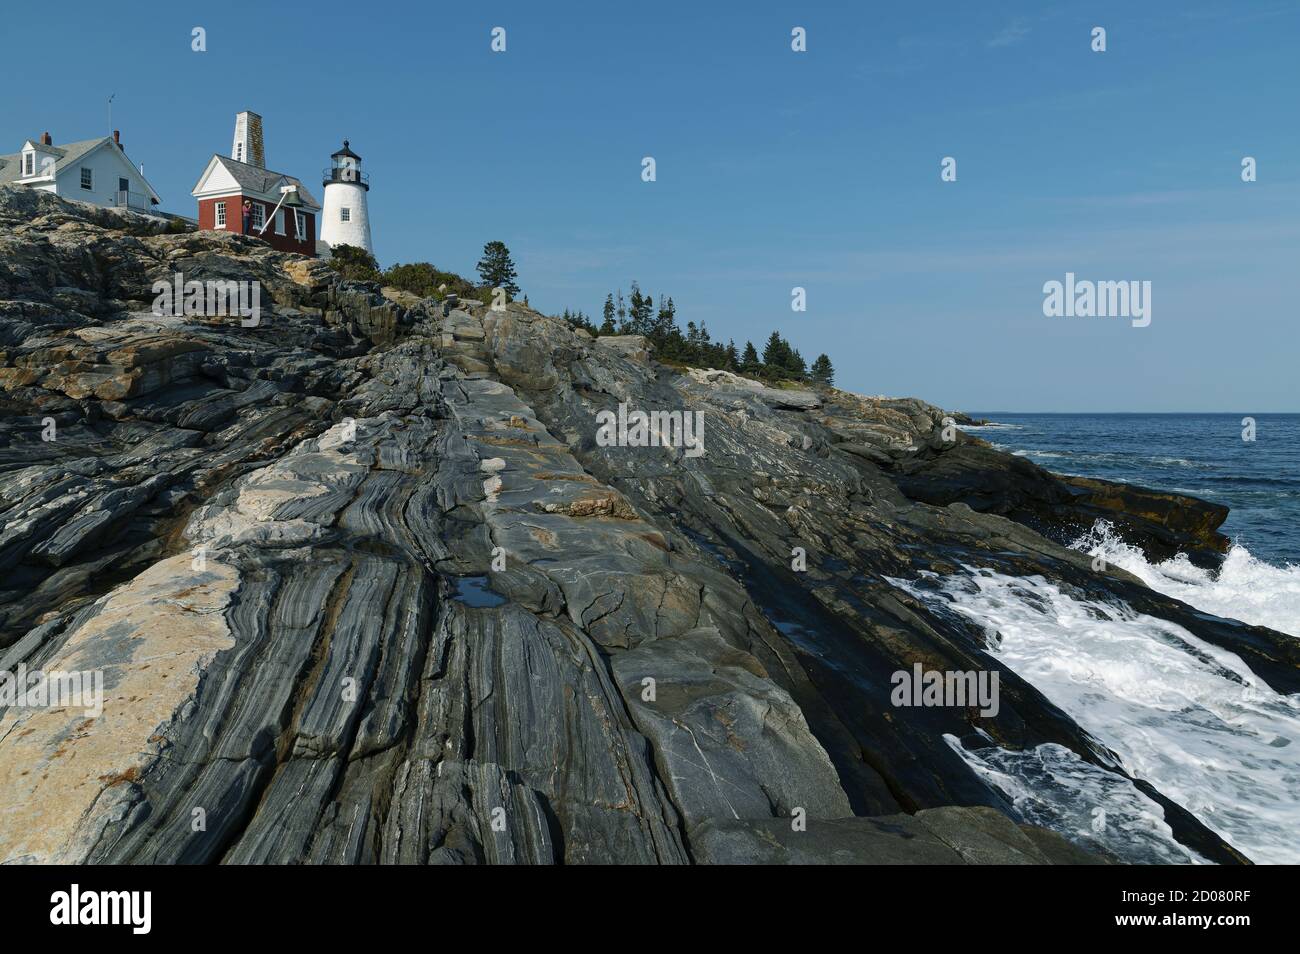 Waves break along rocky coastline. Pemaquid Point lighthouse is located on top of unique metamorphic rock formations that are a favorite attraction. Stock Photo